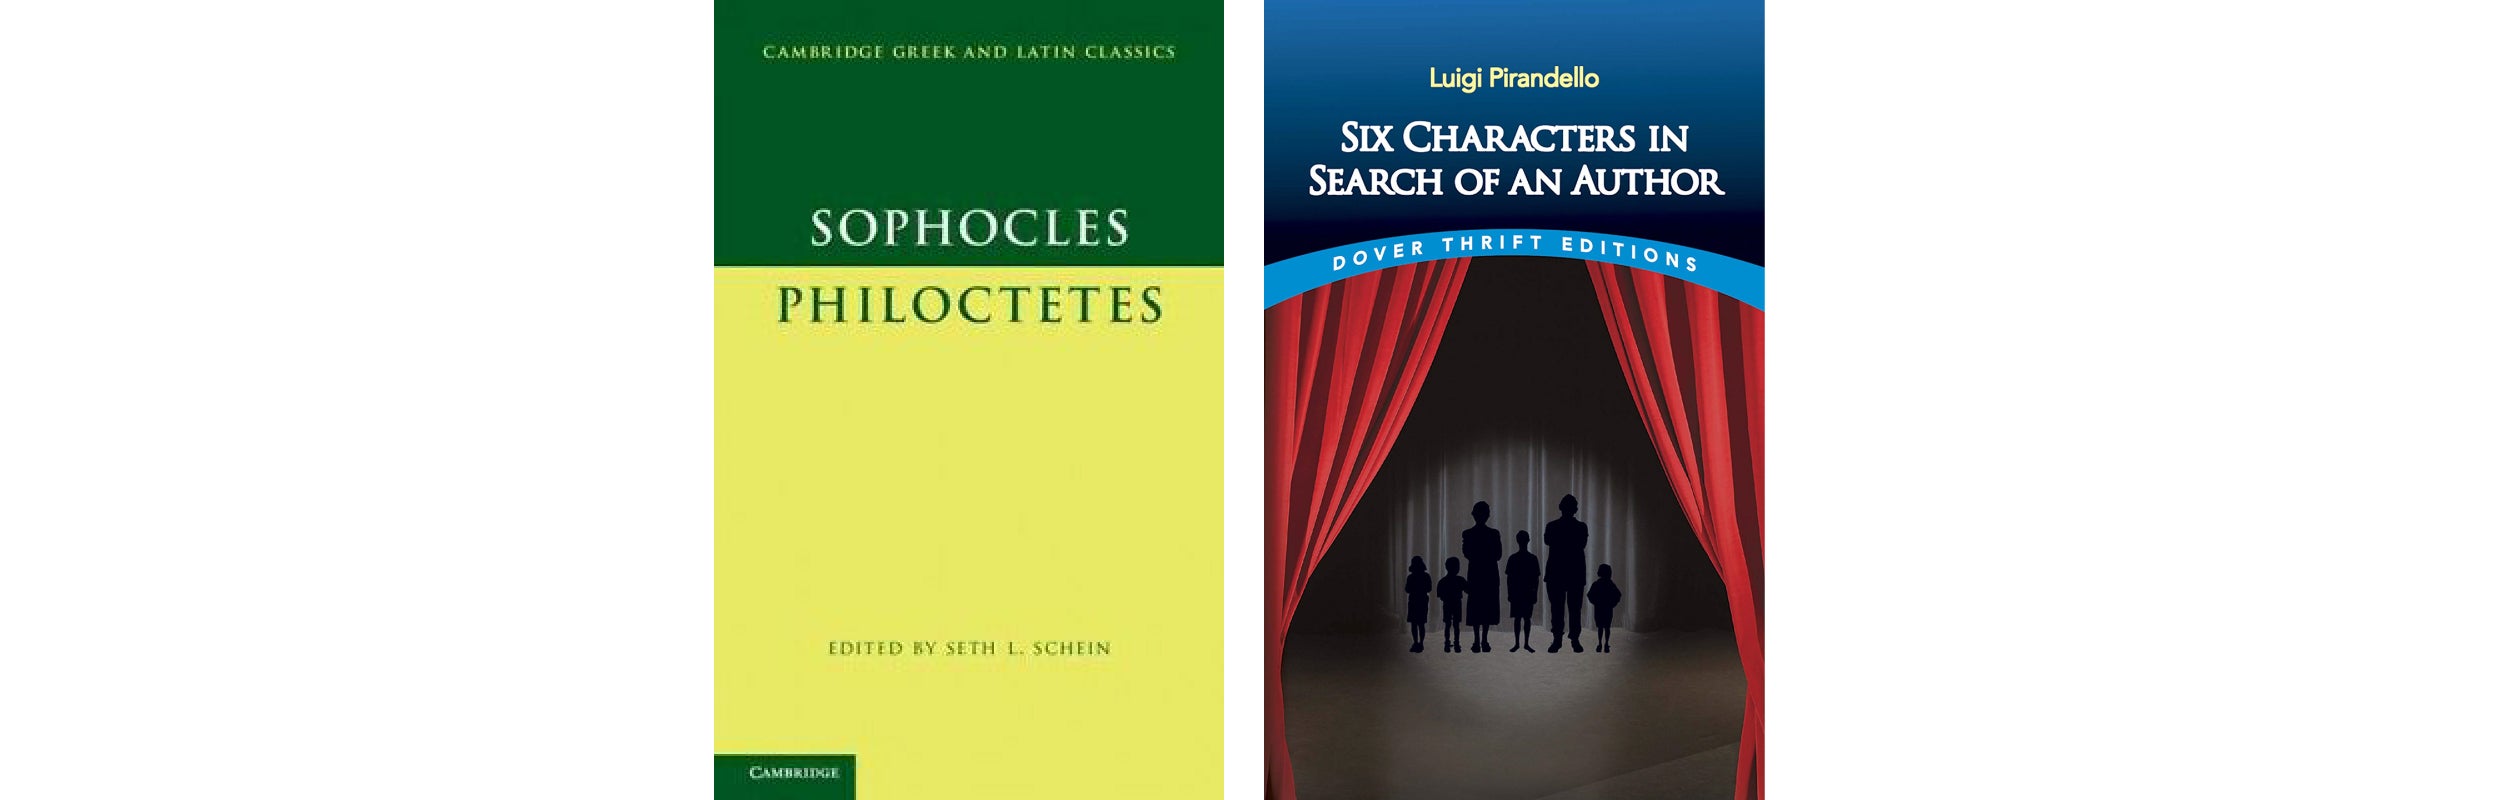 Book cover: "Philoctetes" and "Six Characters in Search of an Author."